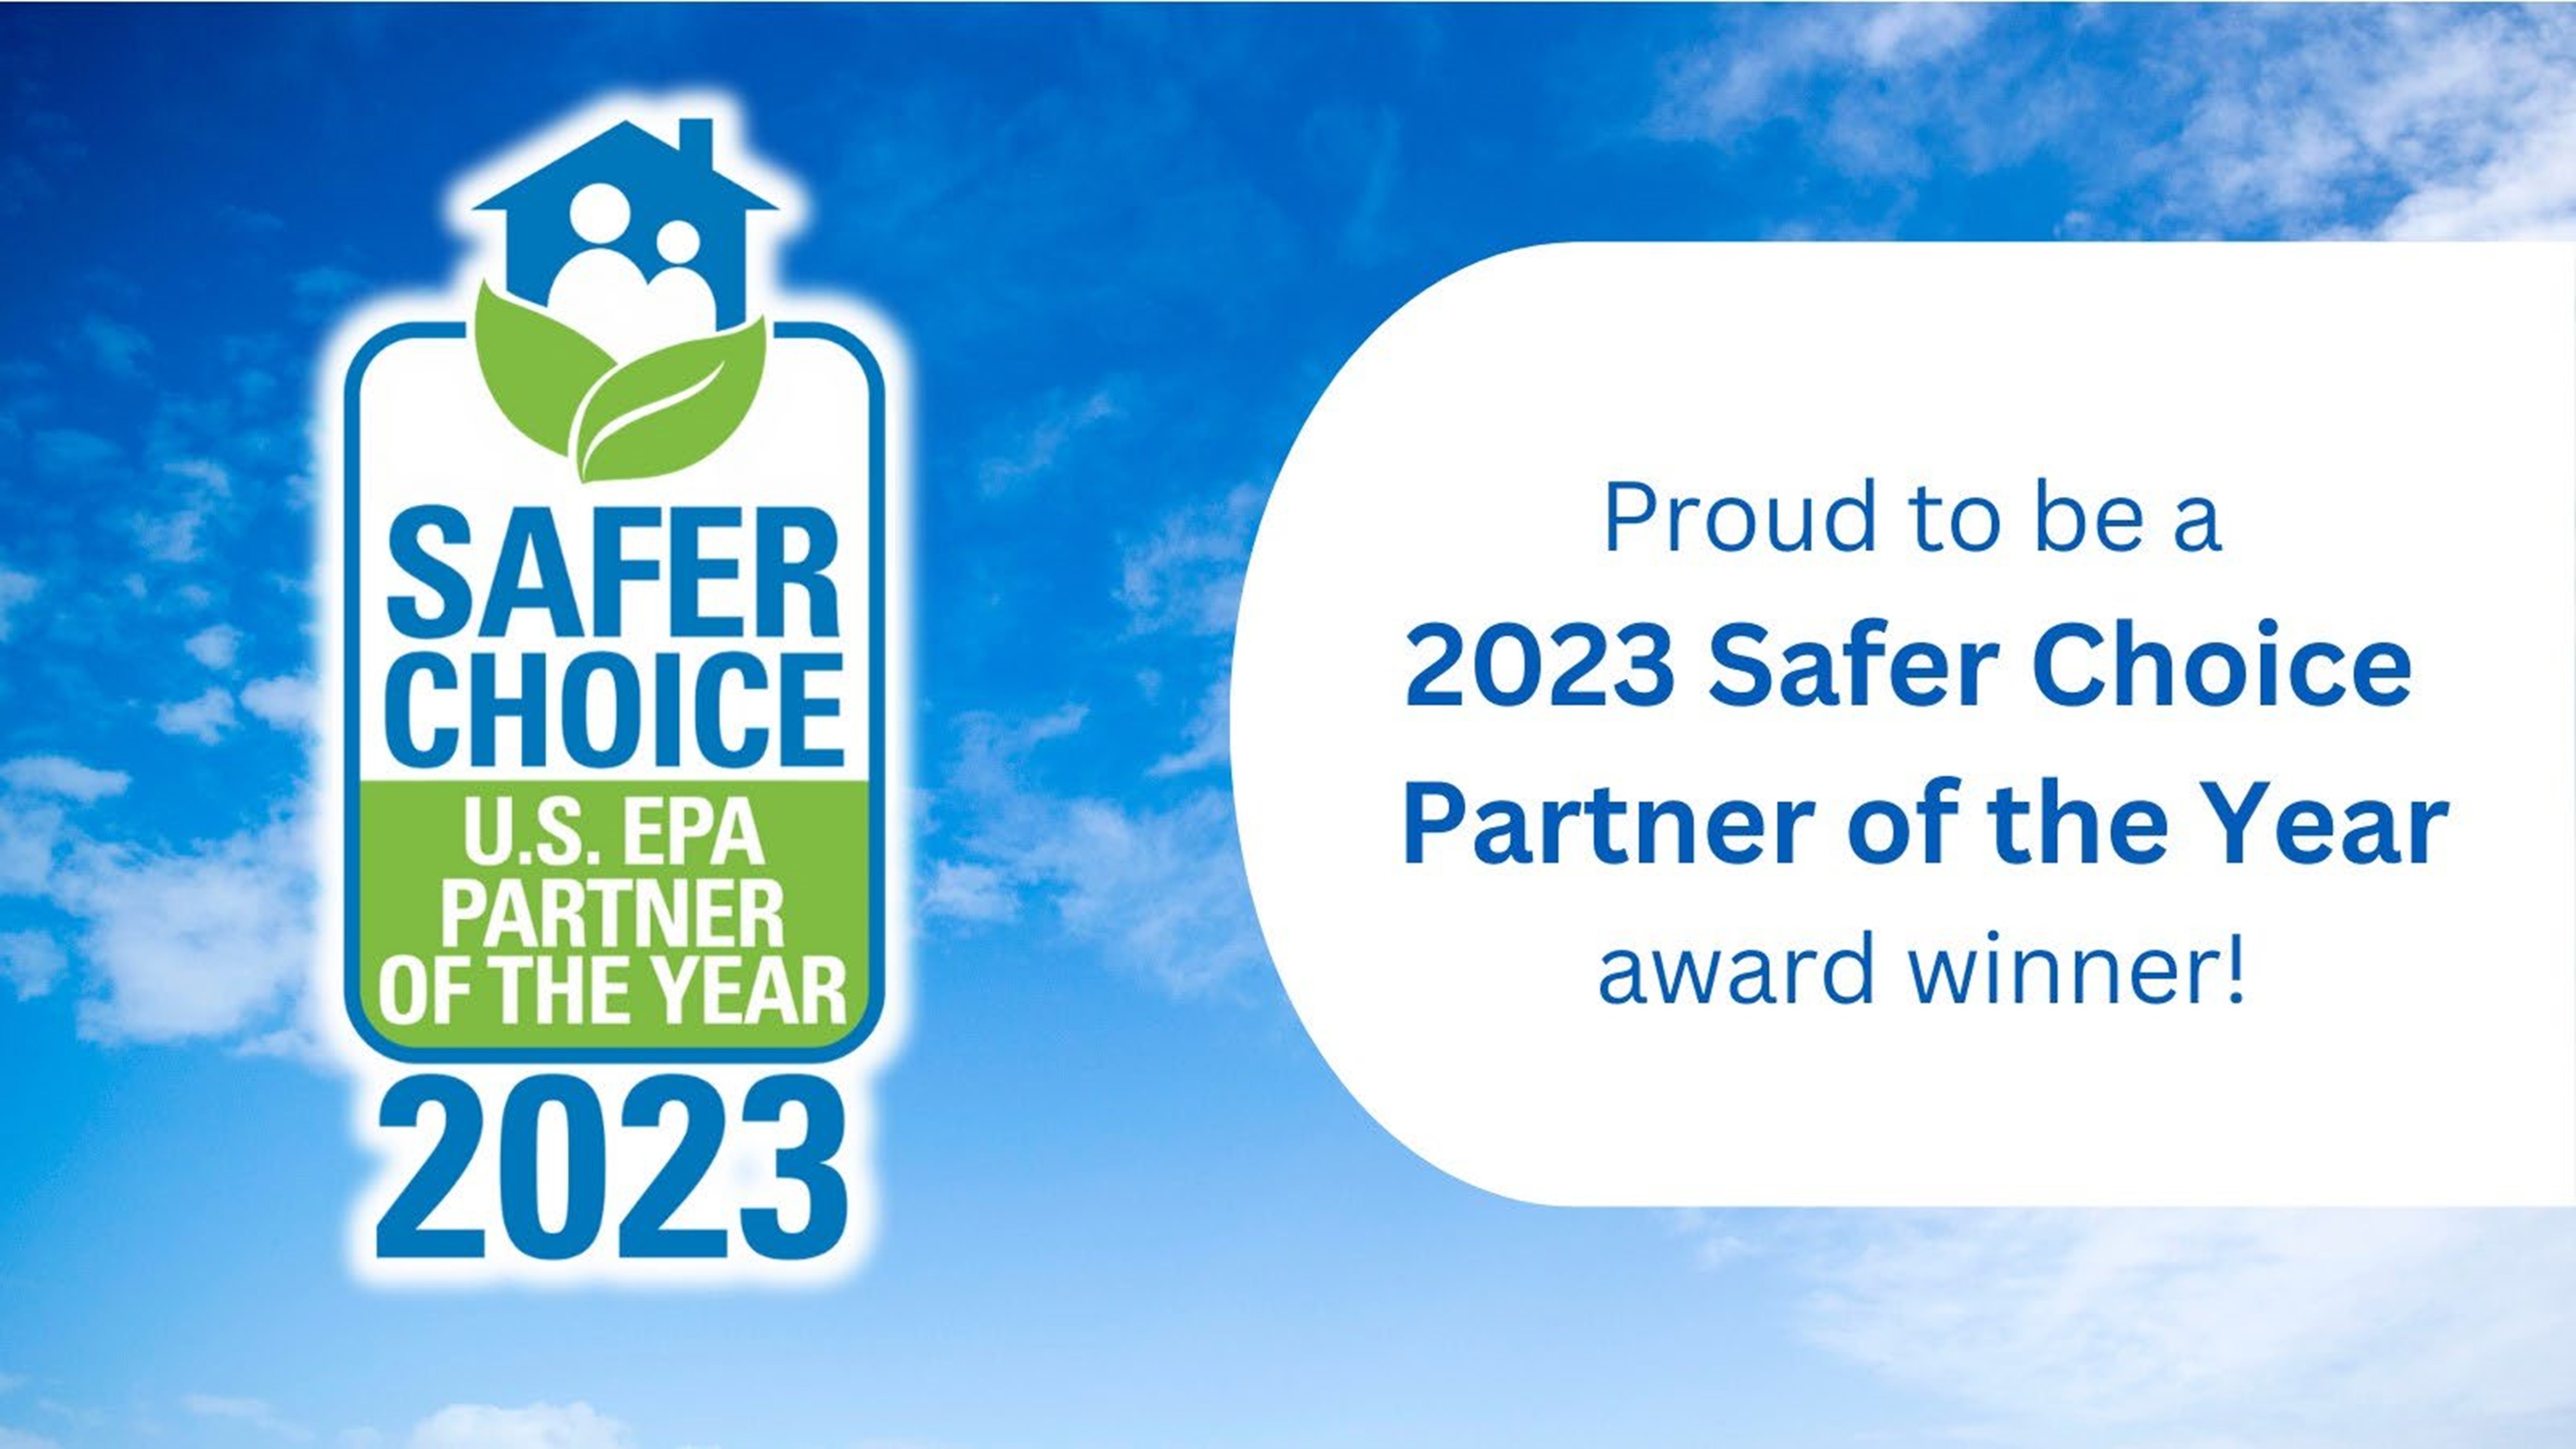 Proud to be a 2023 Safer Choice Partner of the Year award winner!